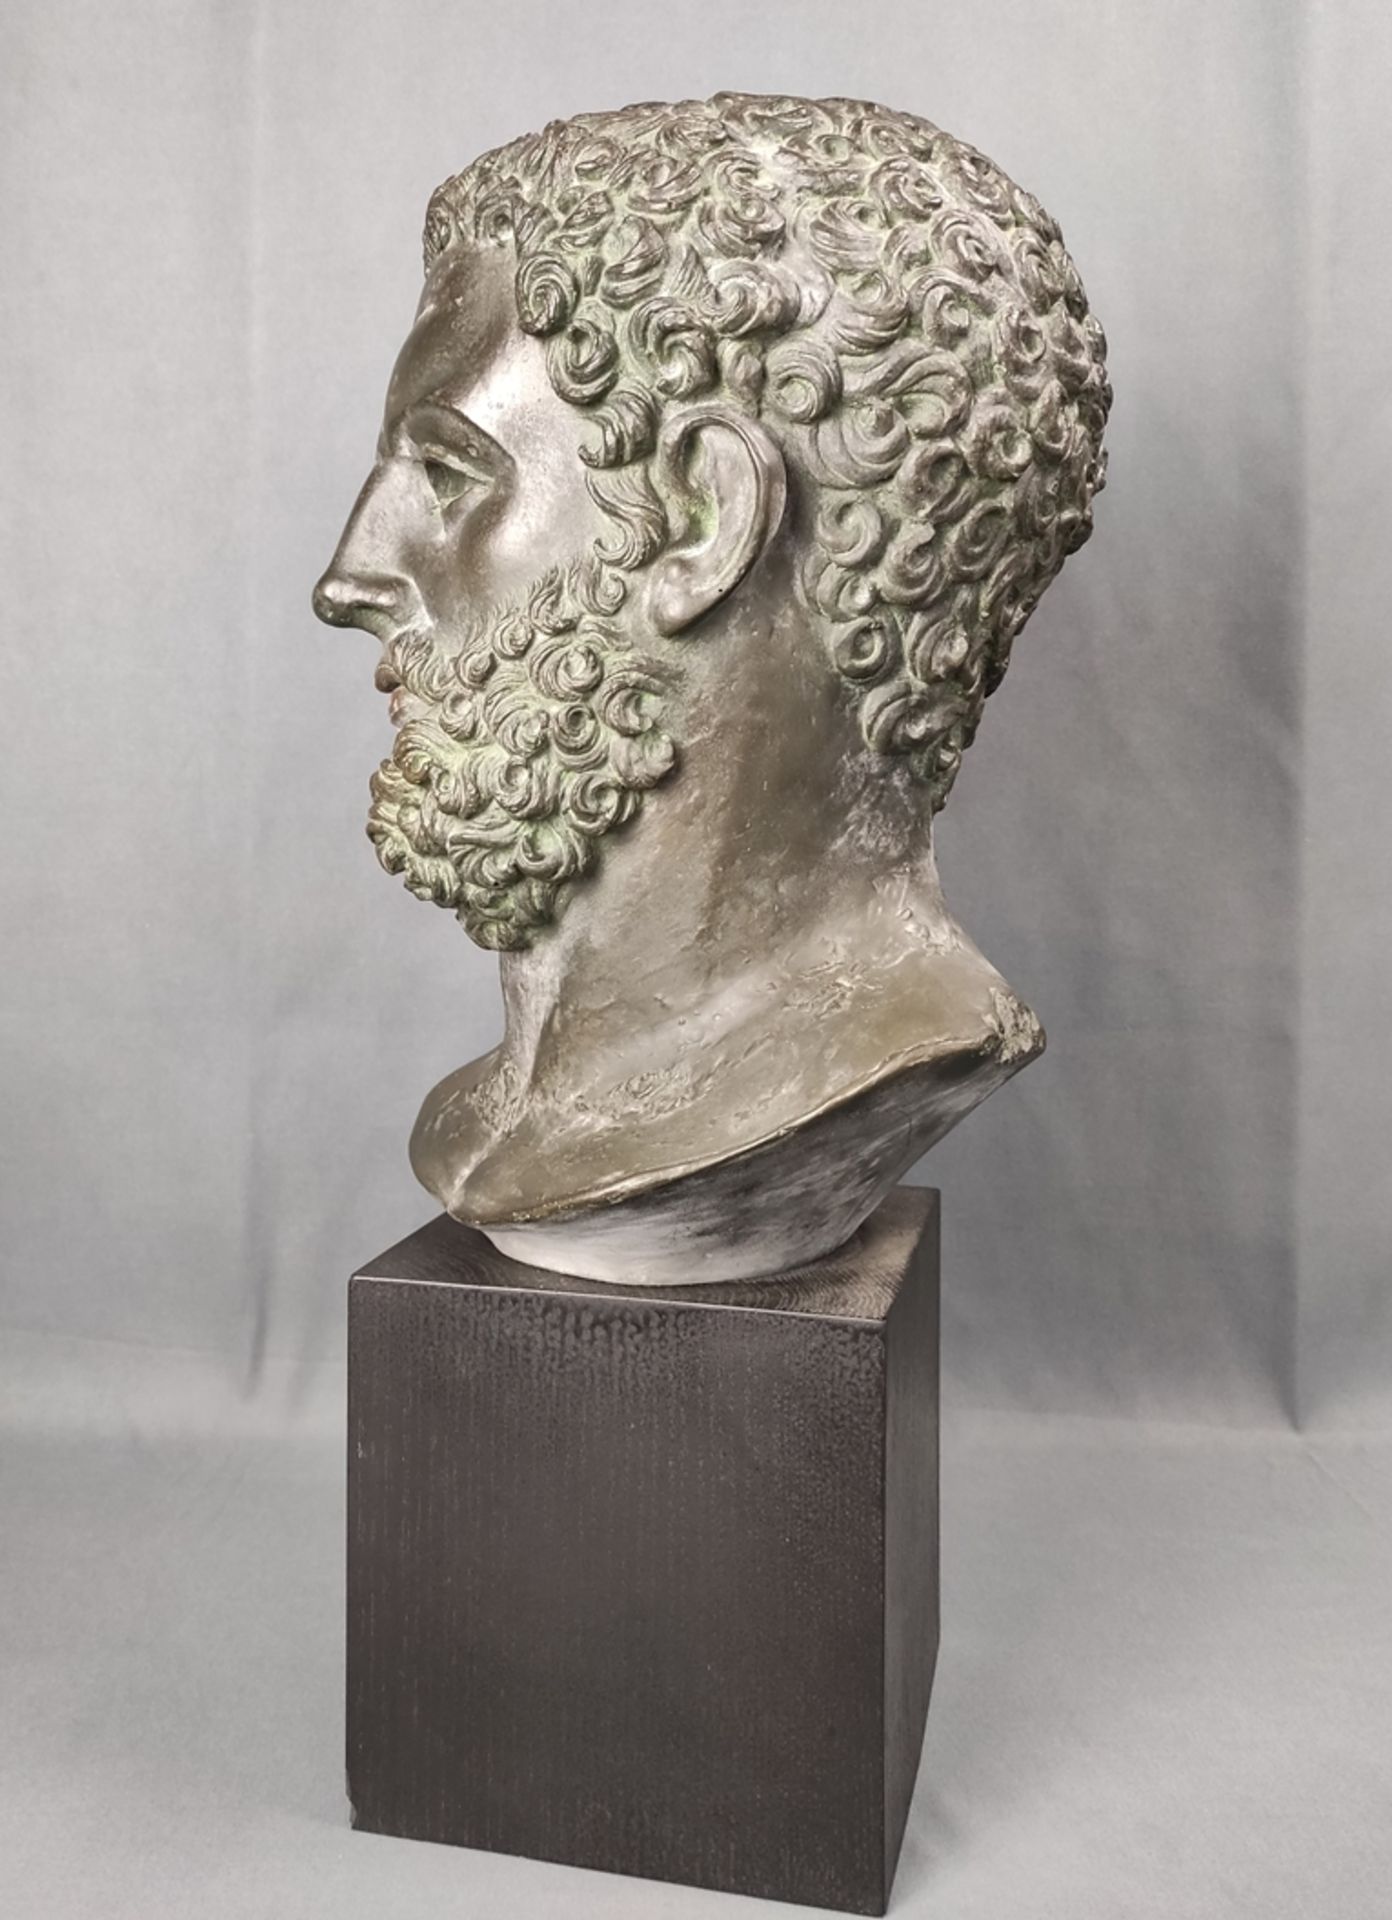 Hercules head, art casting from the Louvre, H 32 cm, with black wooden base height 51cm - Image 5 of 5